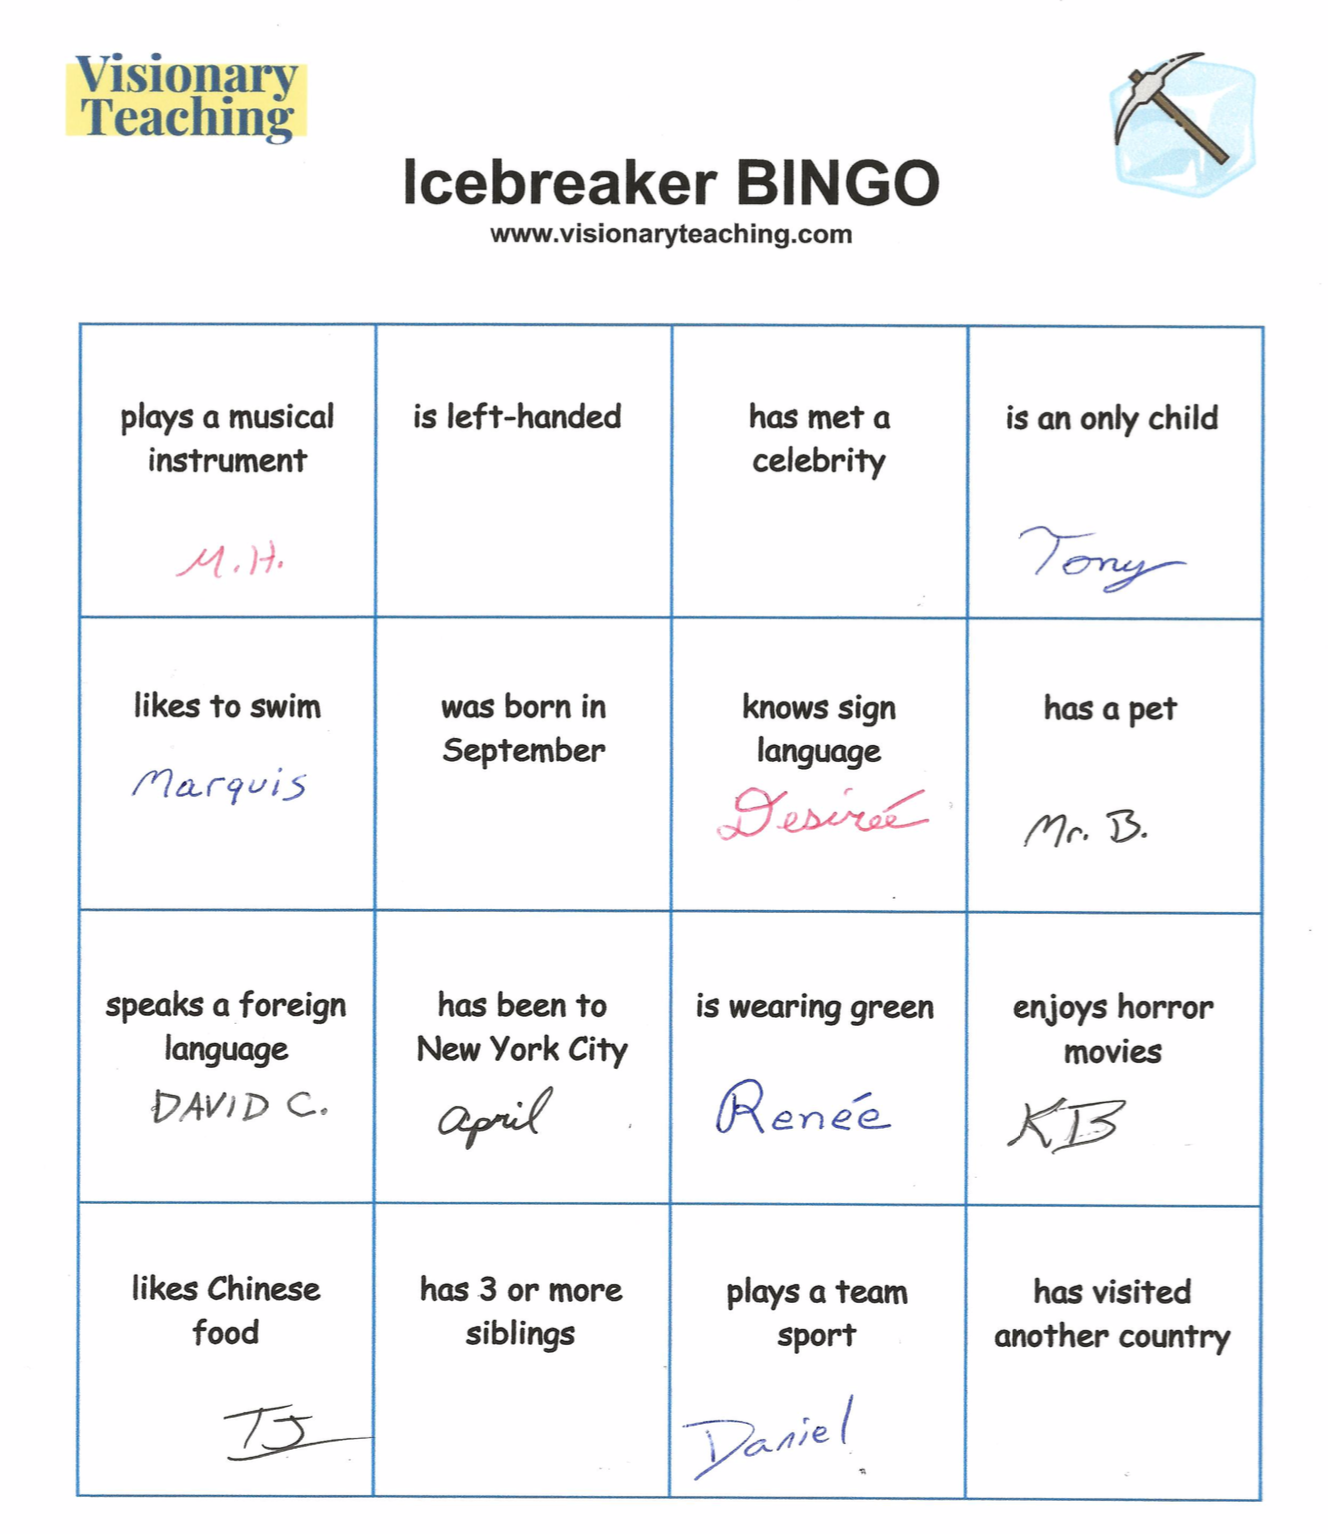 Icebreaker Bingo: The Ultimate Getting to Know You Game Visionary